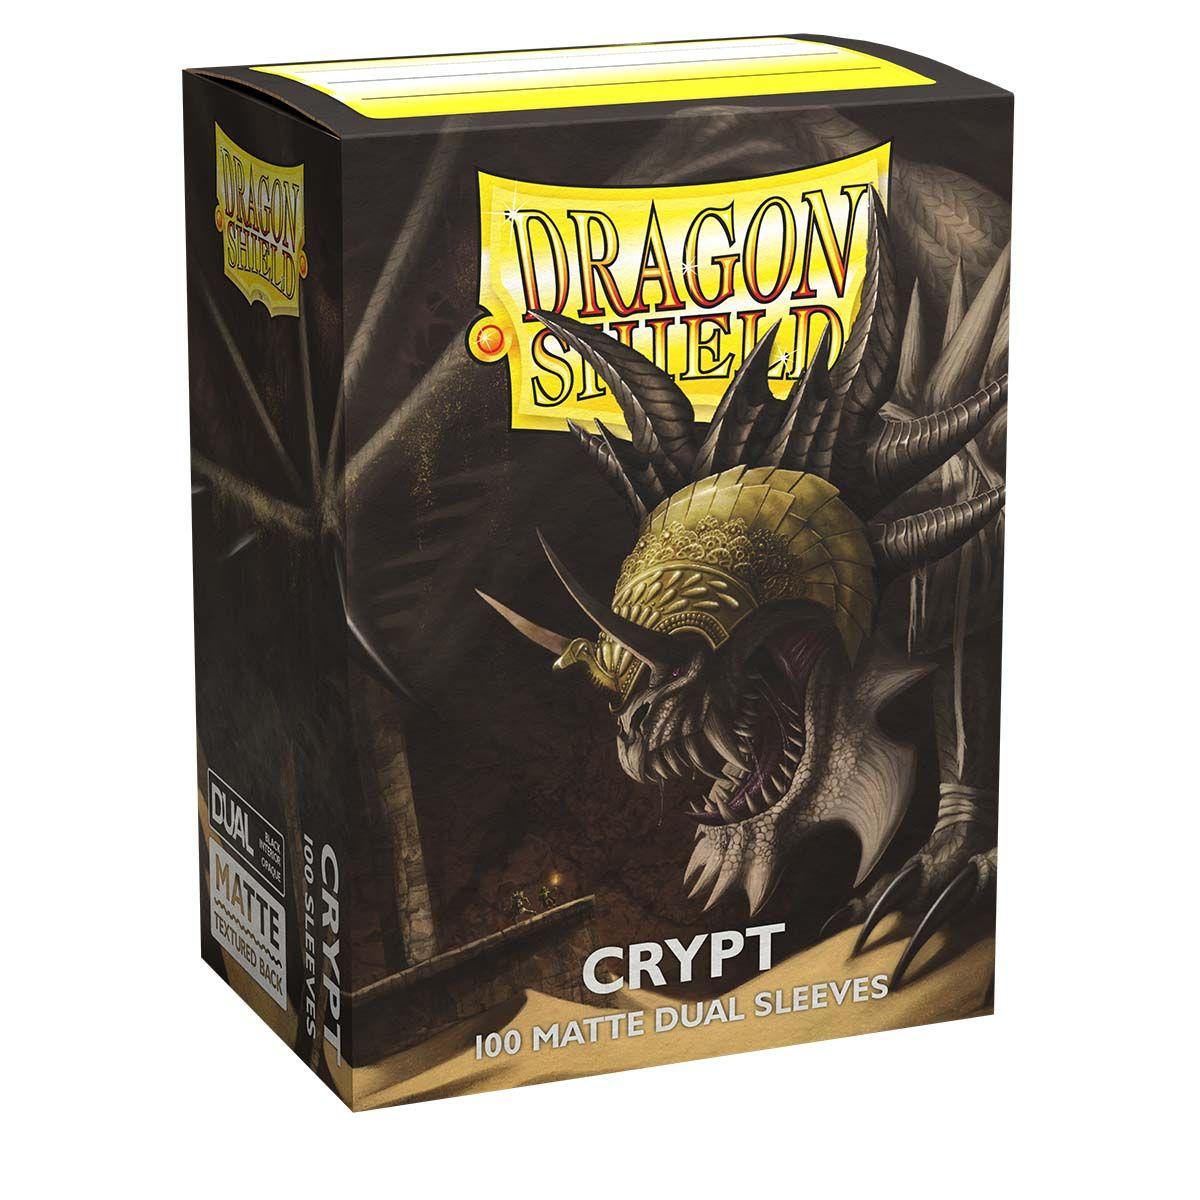 Dragon Shield - Card Sleeves: Crypt Dual Matte, Standard Size (100 Sleeves)